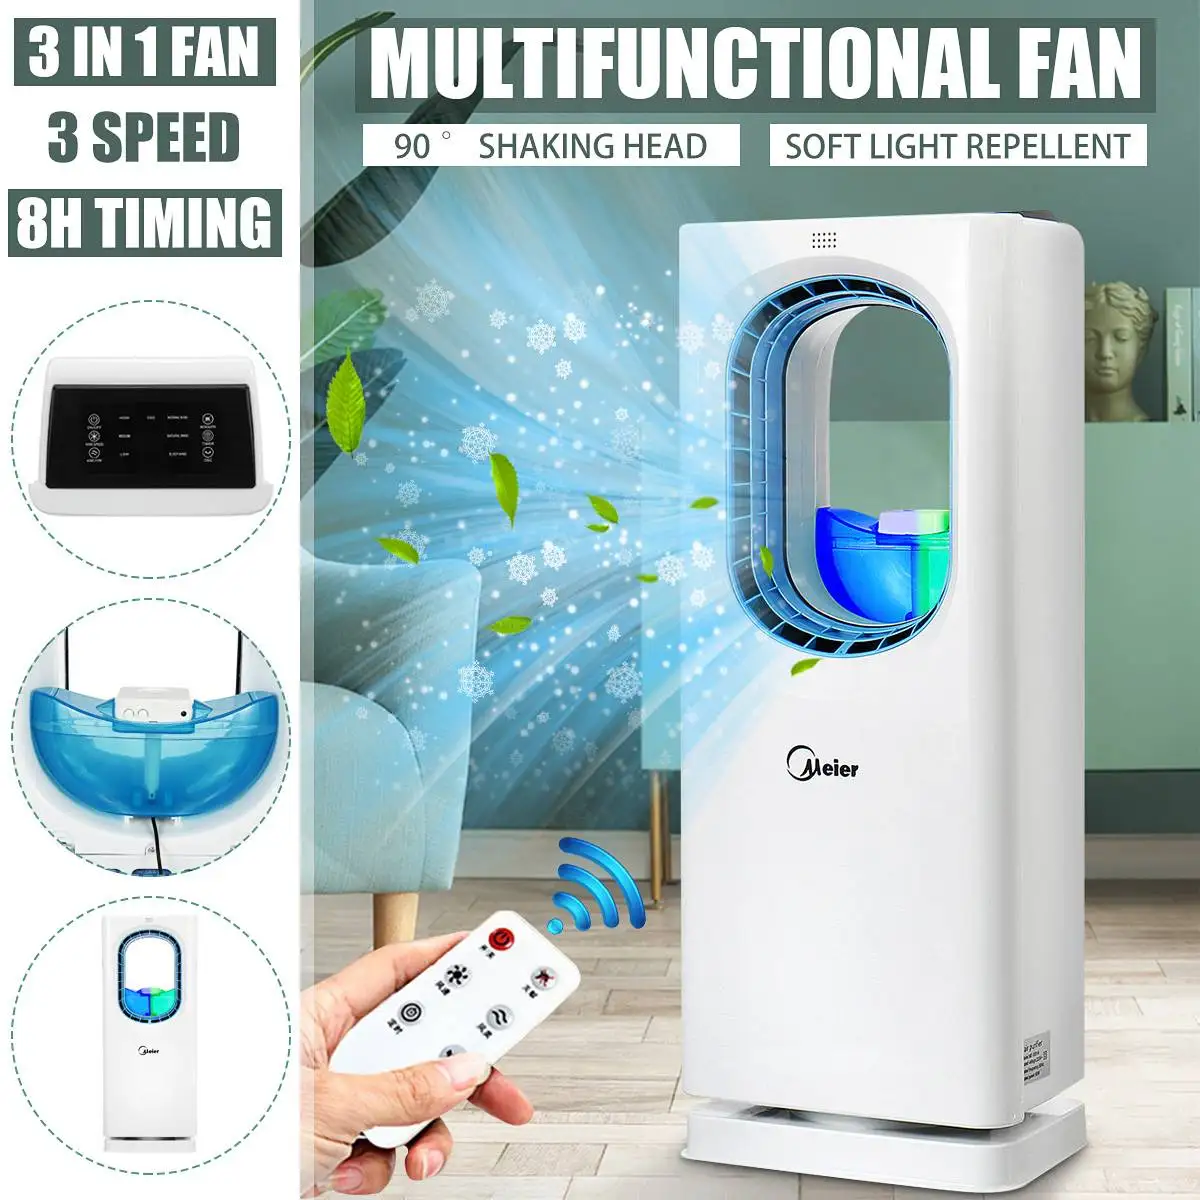 Mobile Air Conditioning Fan Air Humidifier Purifier Repelling Mosquitoes Home Room Floor Bladeless Standing Tower Fan Cooler